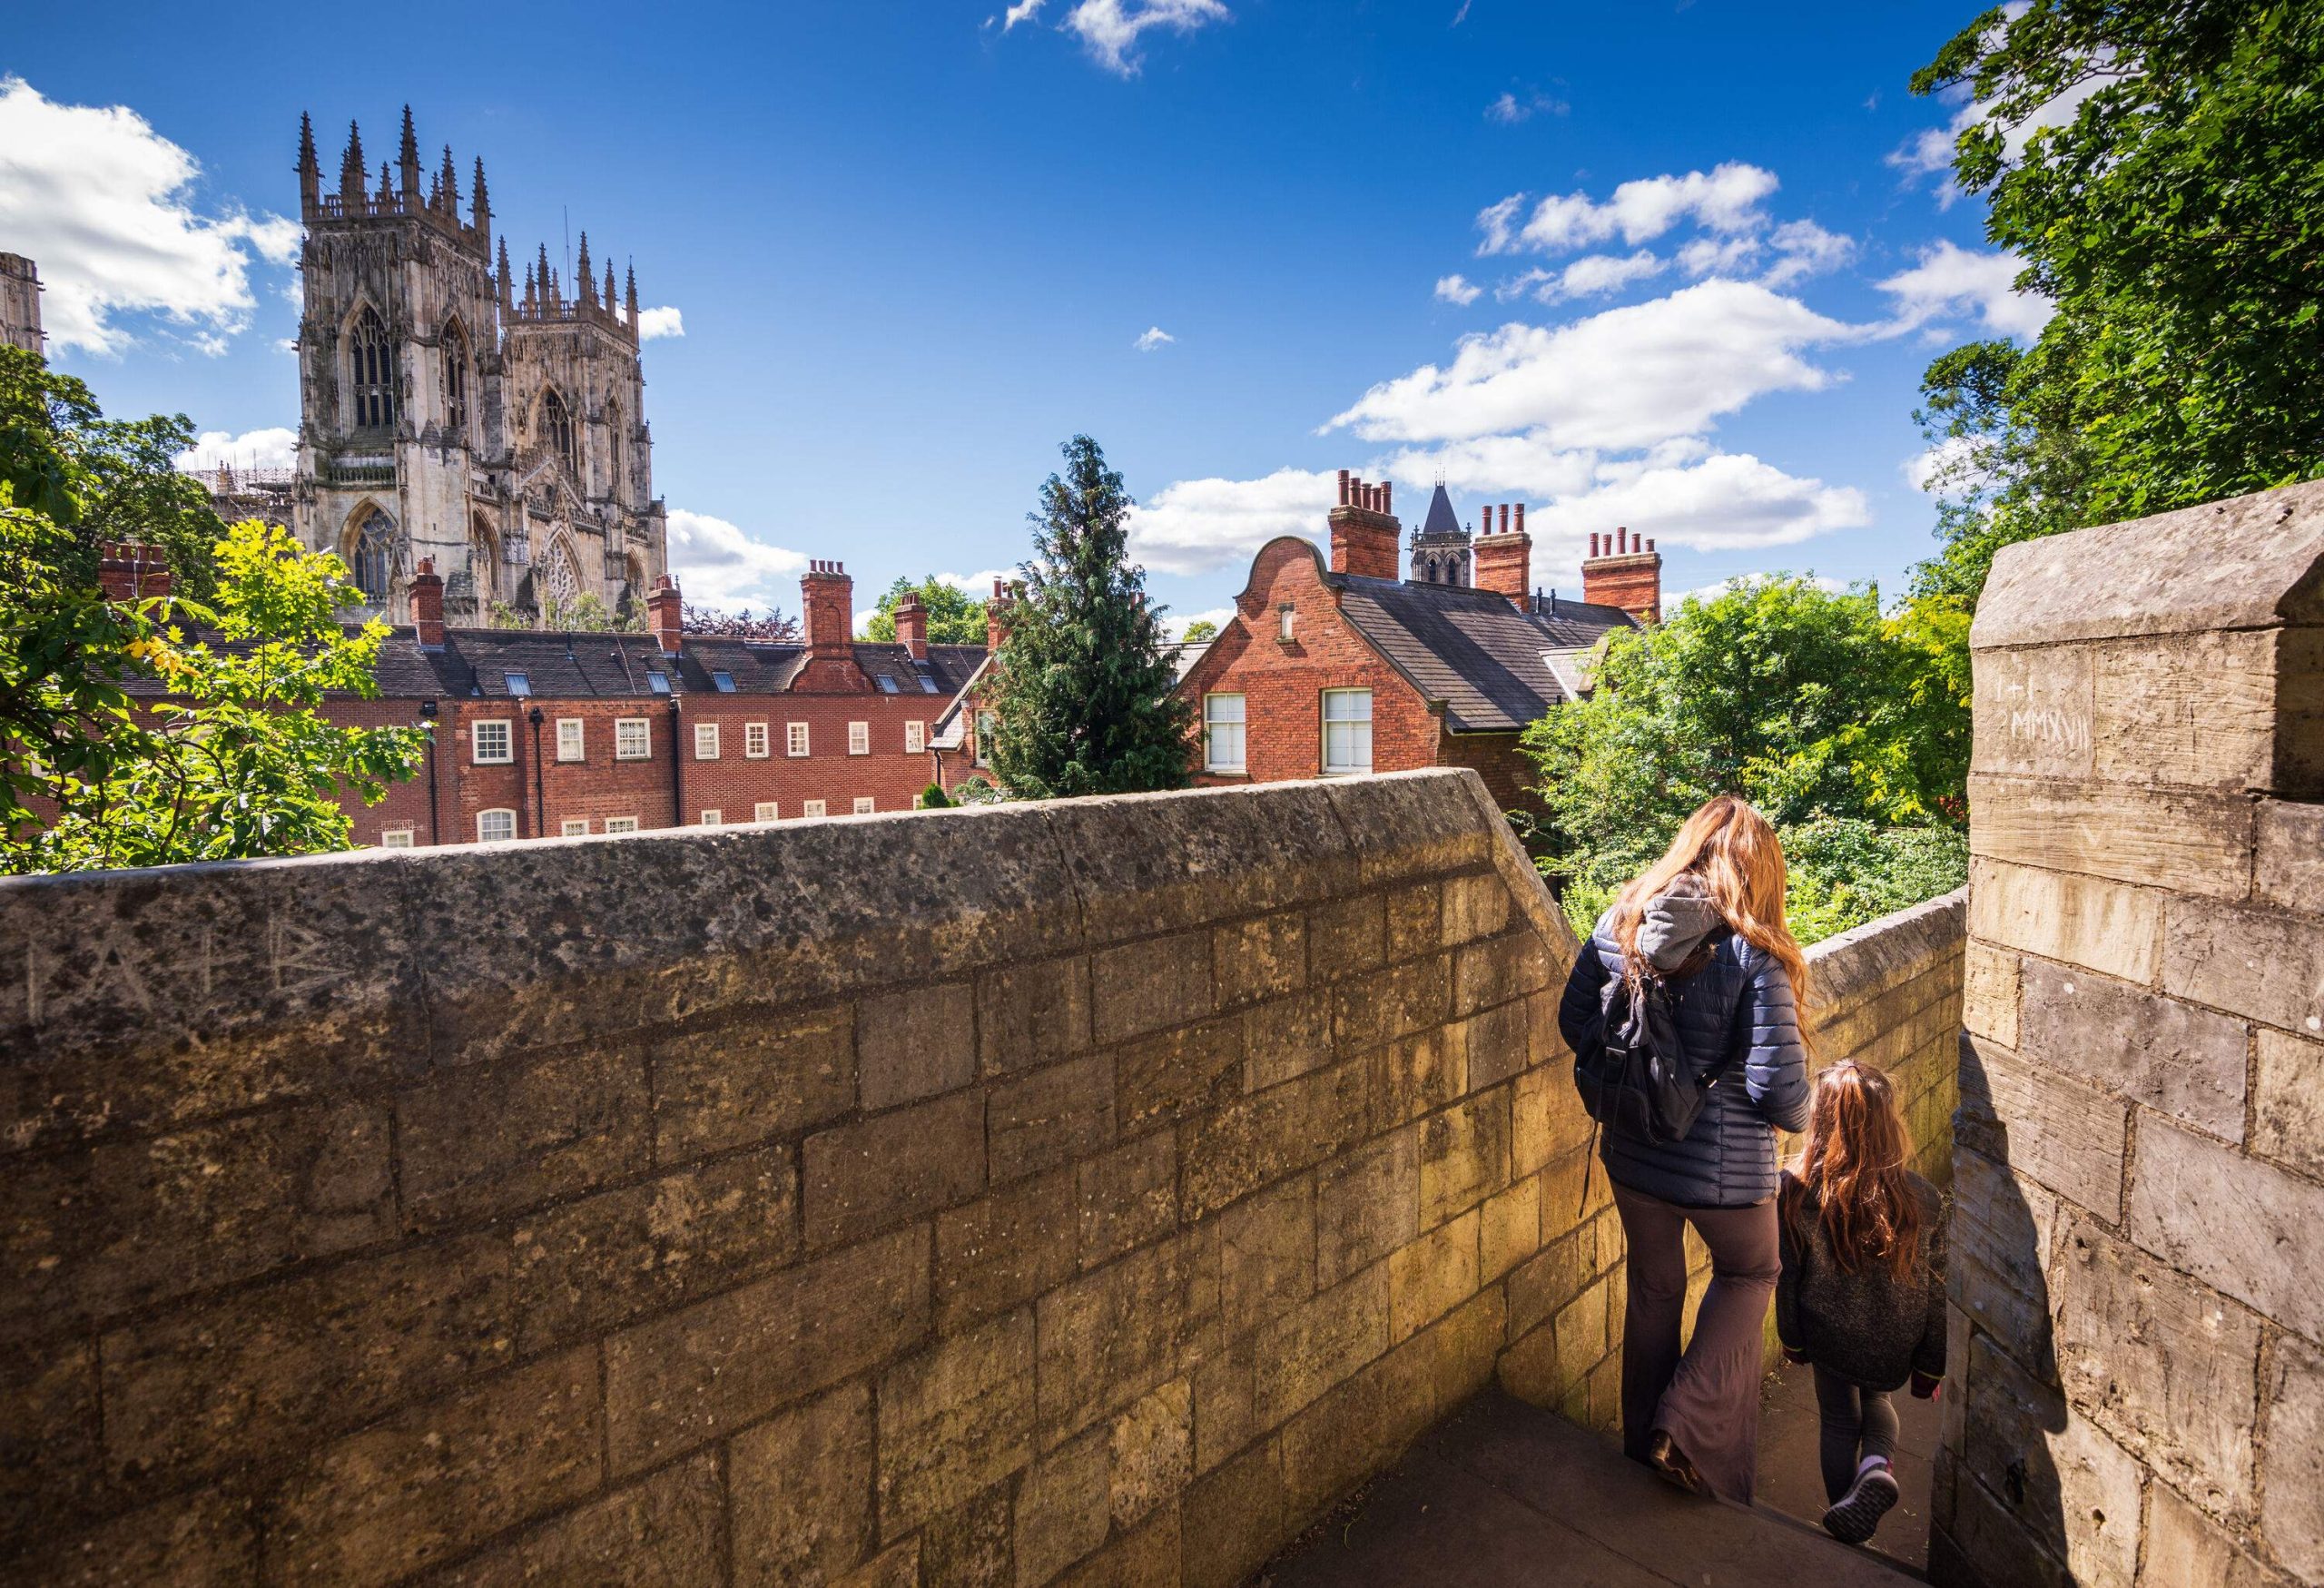 A mother and a daughter go down the stairs of a city wall with a view of church towers.